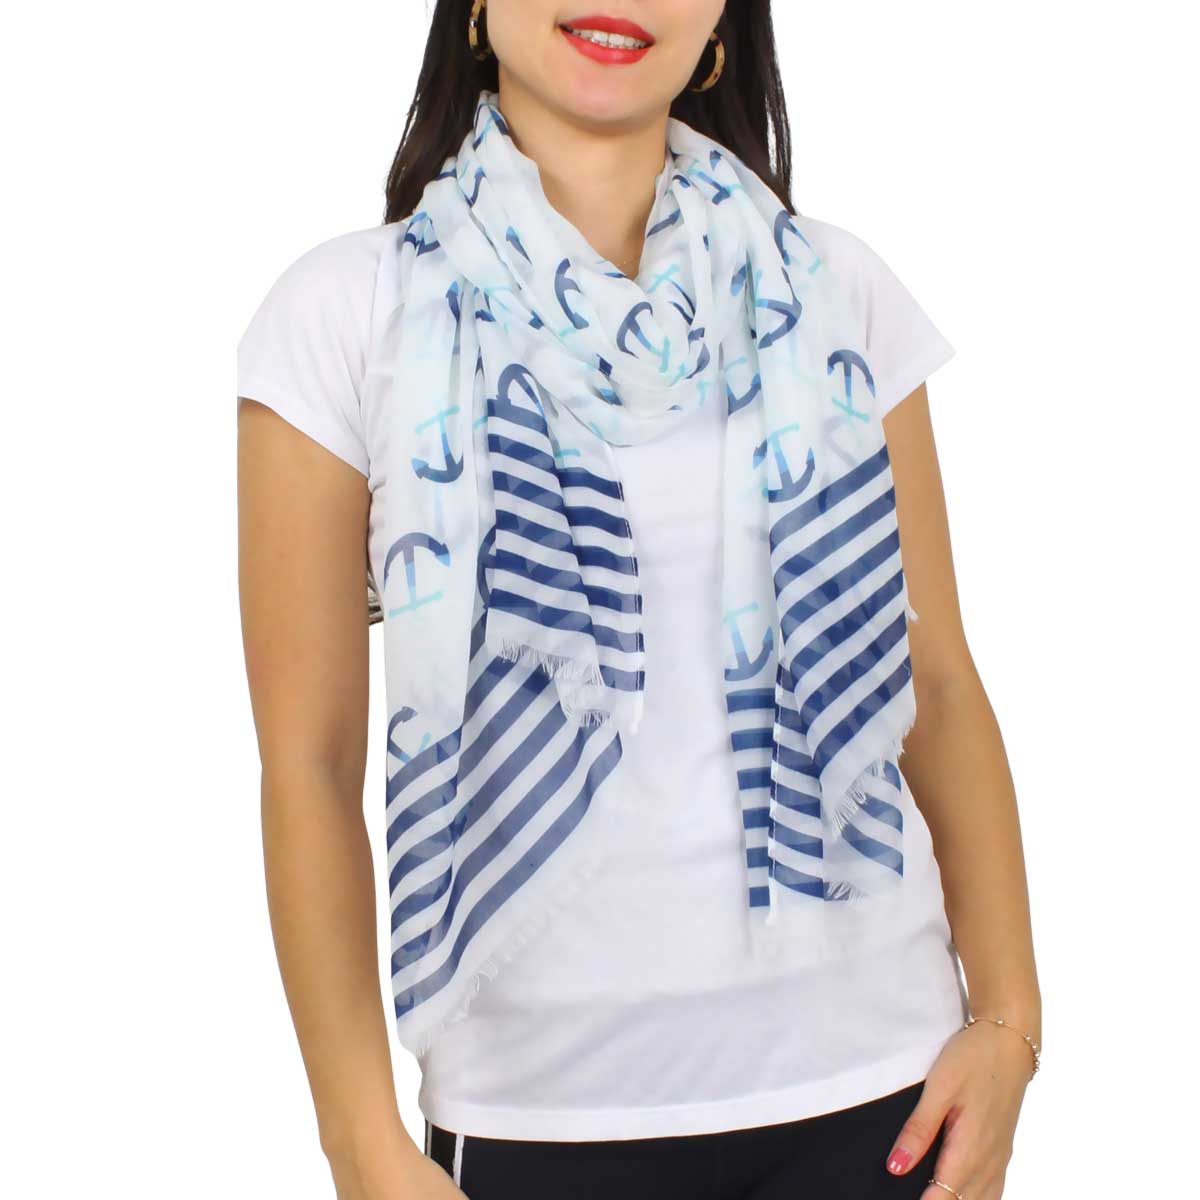 3111 - Nautical Print Scarves Oblong and Infinity 076 Beige <br> Seahorse Print Scarf/Shawl - 